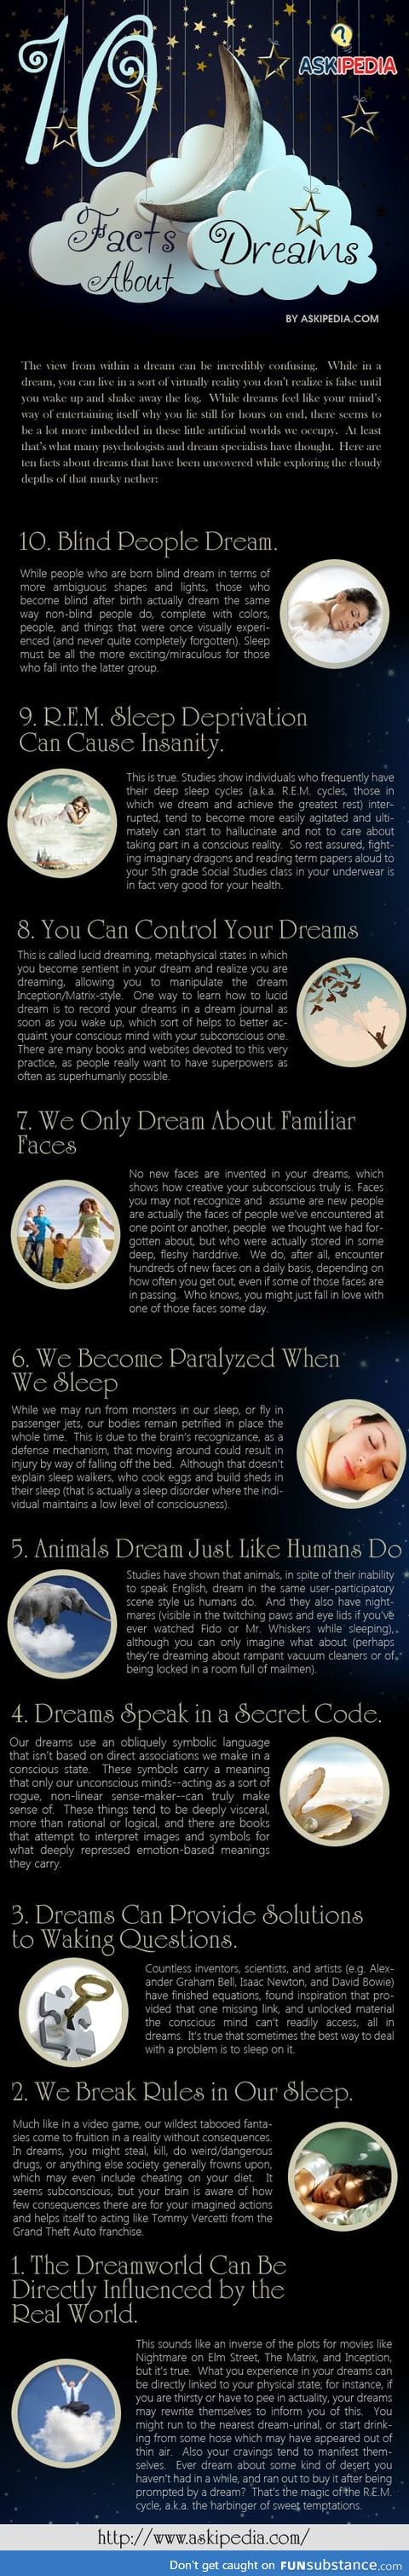 Psychological Facts about Dream